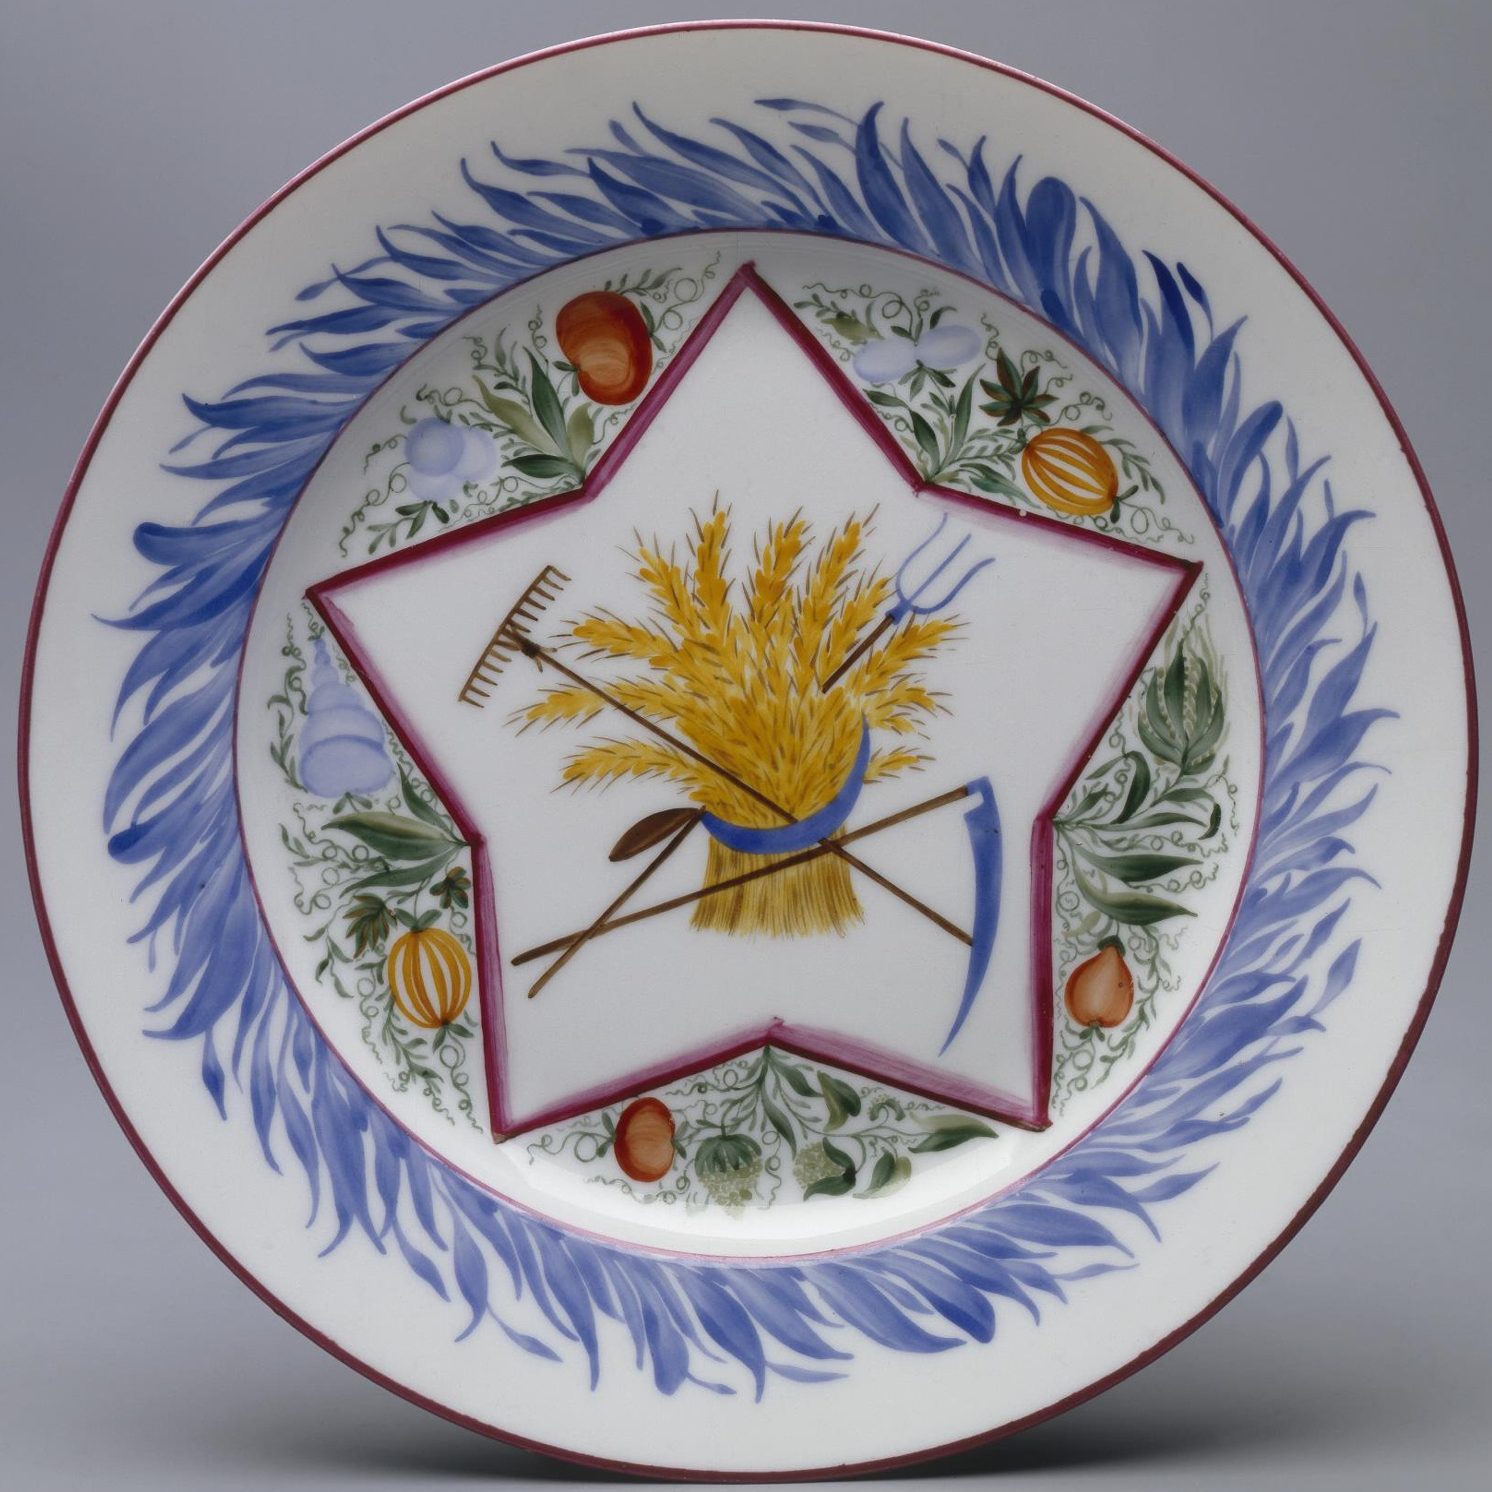 Soviet Propaganda Porcelain Plate "Star with Sheaf" after Lydia Vyechegzhanina. State Porcelain Factory. 1920